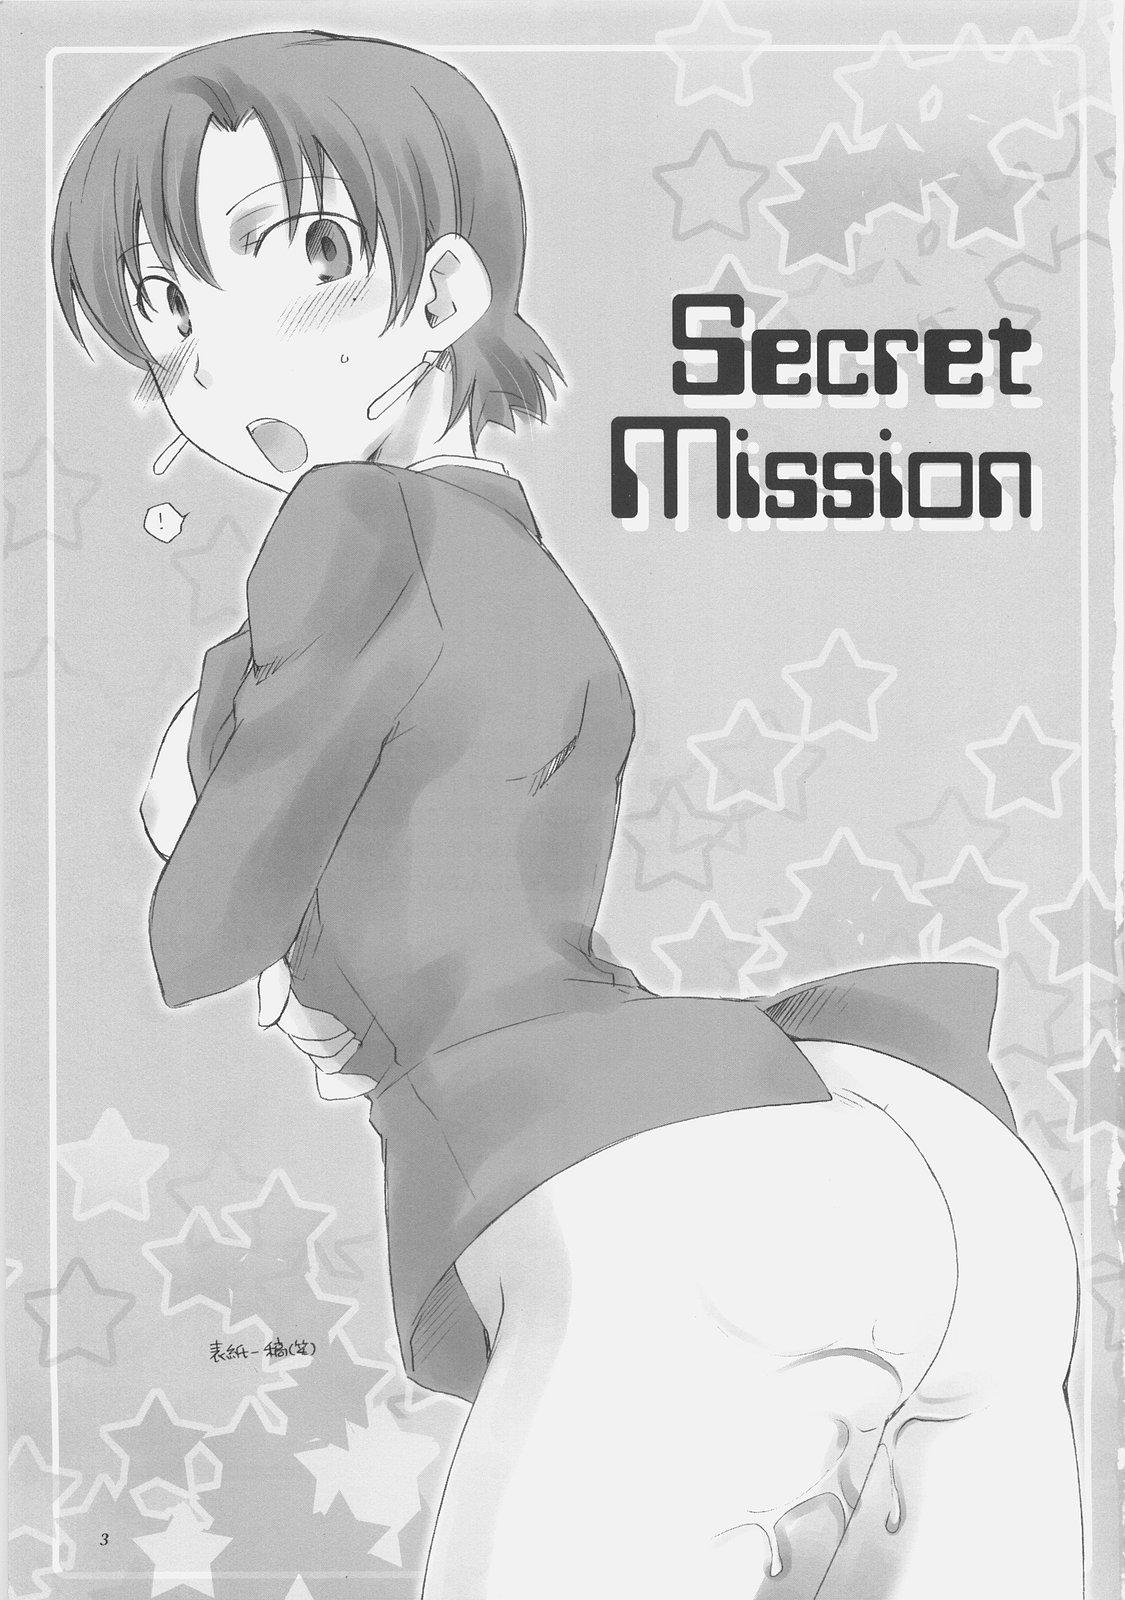 Dykes Secret Mission - Fate hollow ataraxia Hot Brunette - Page 2